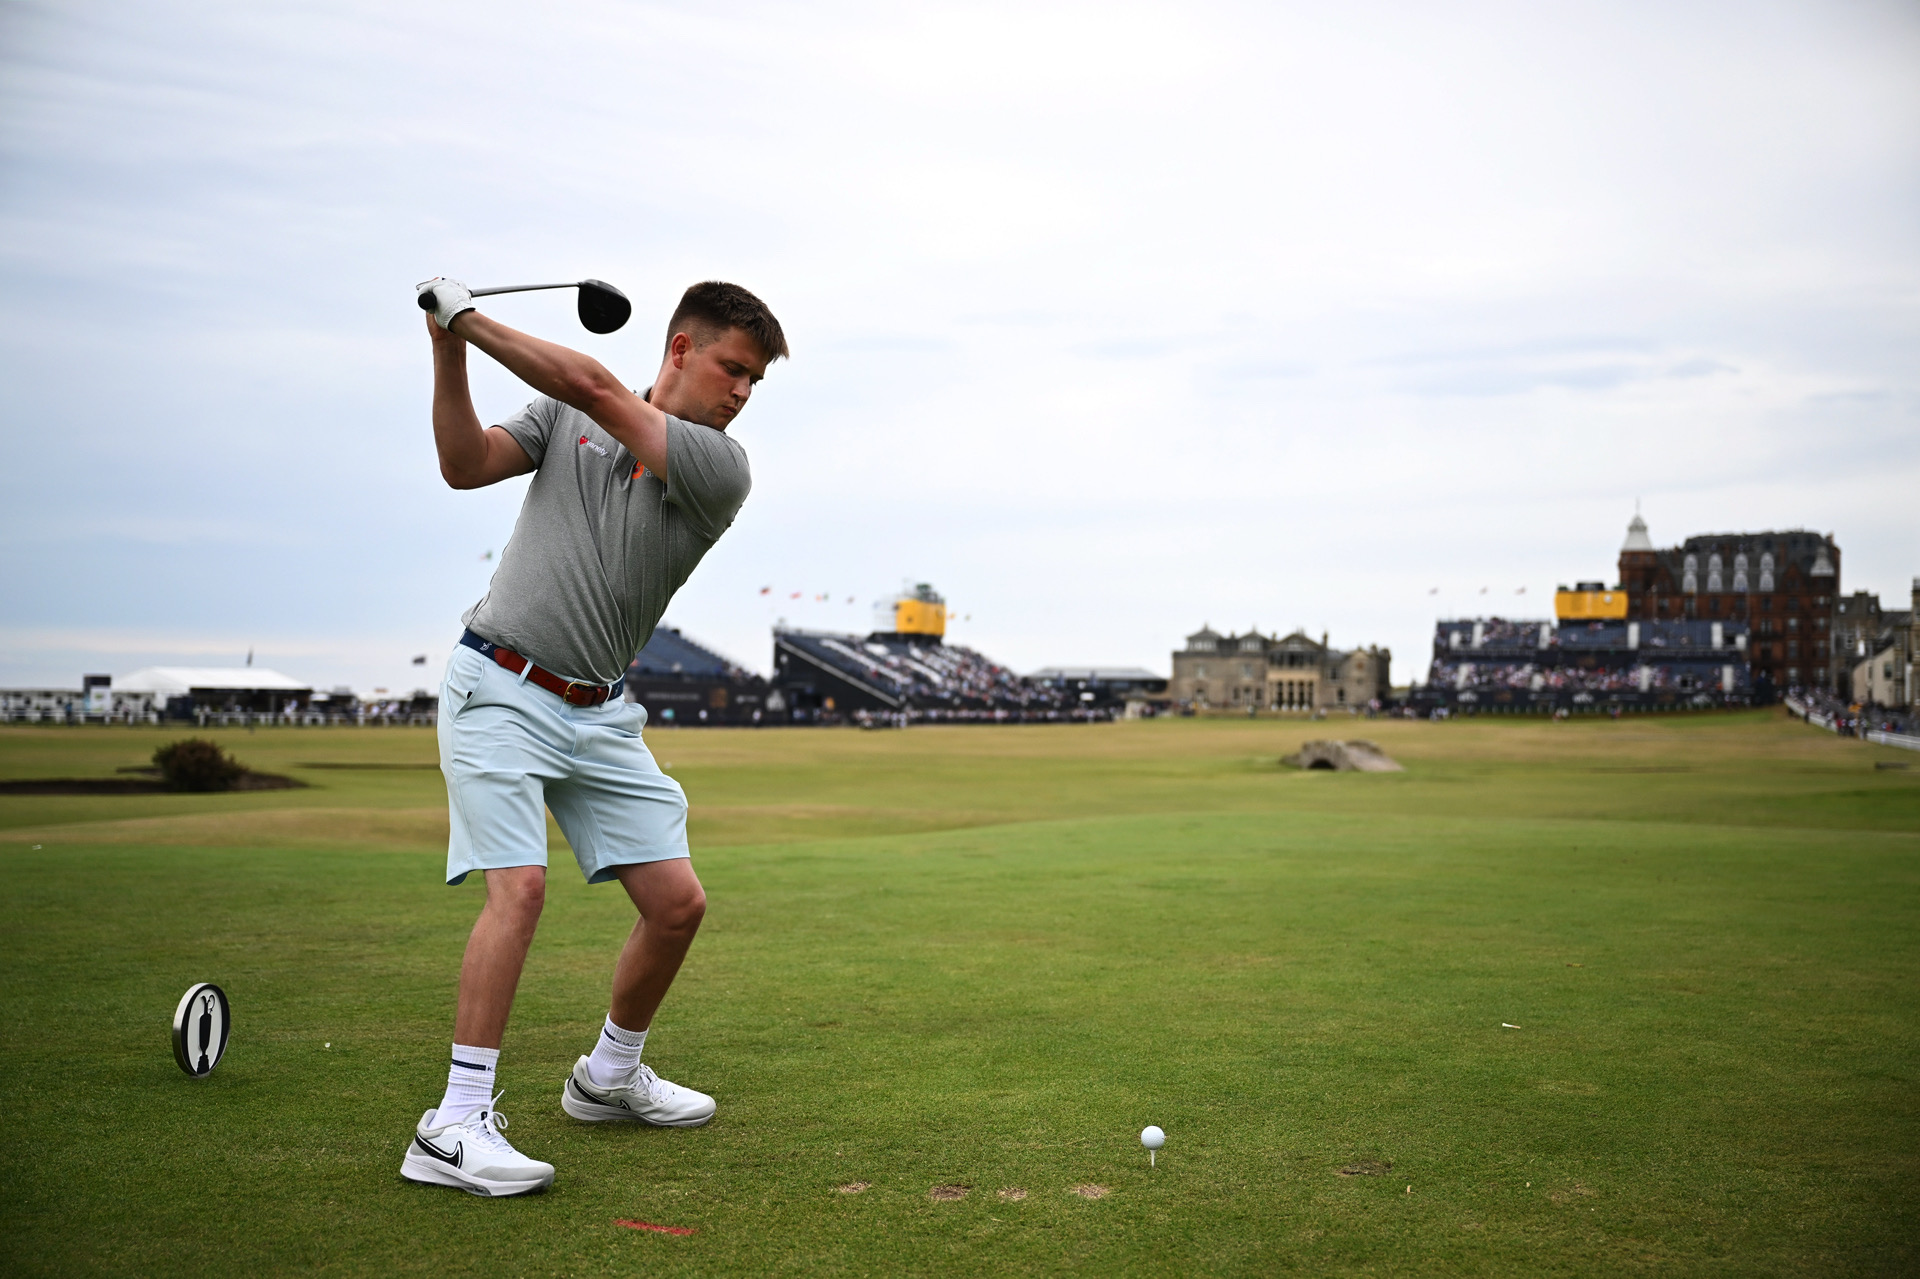 Kipp Popert of England tees off on the 18th hole during the Celebration of Champions prior to The 150th Open at St Andrews Old Course.